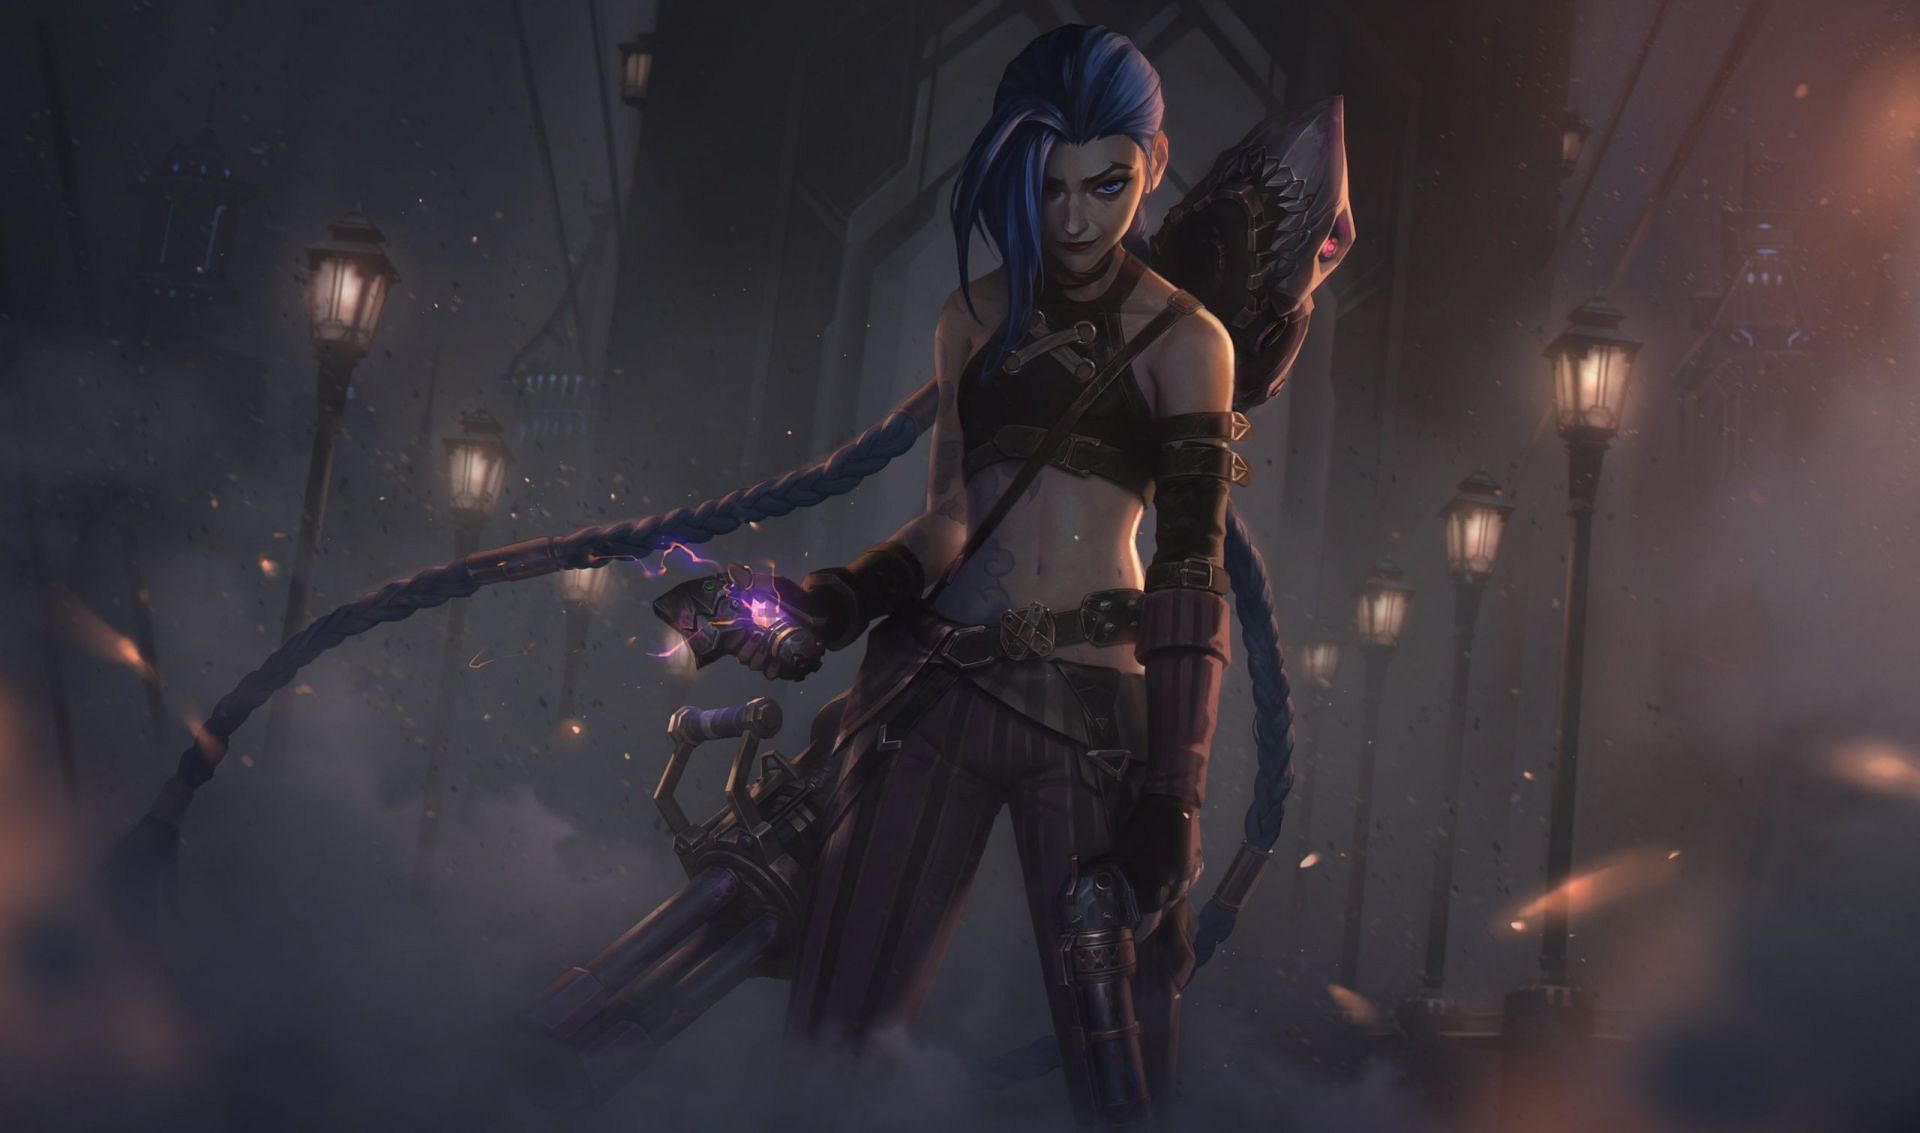 Jinx will descend into madness even further in Act III (Image via League of Legends)